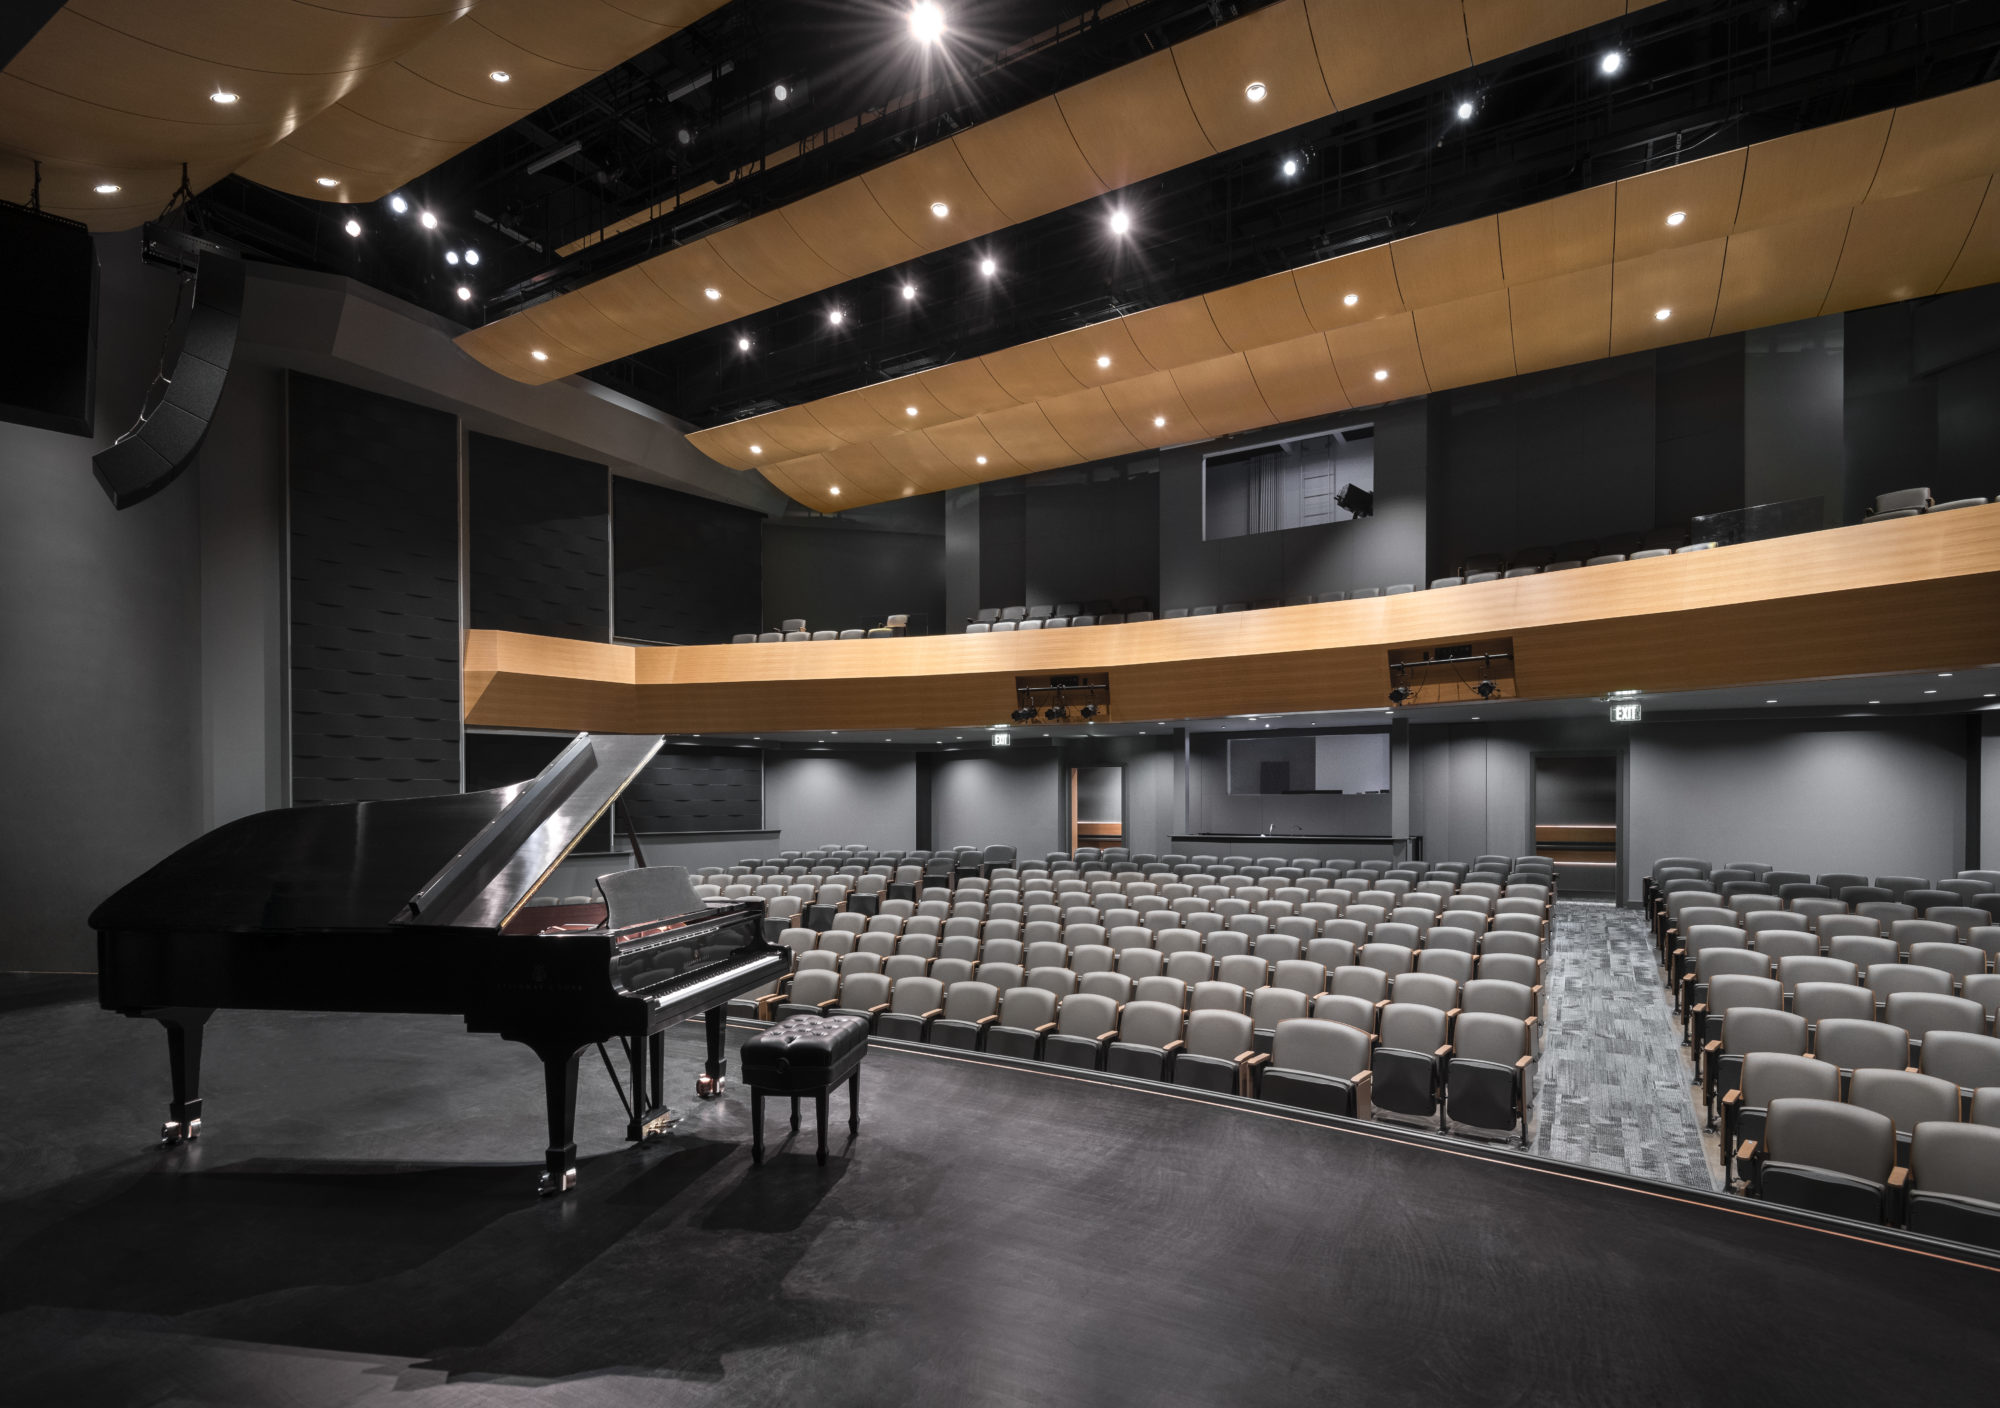 The luxury shell point music auditorium at Myers, FL